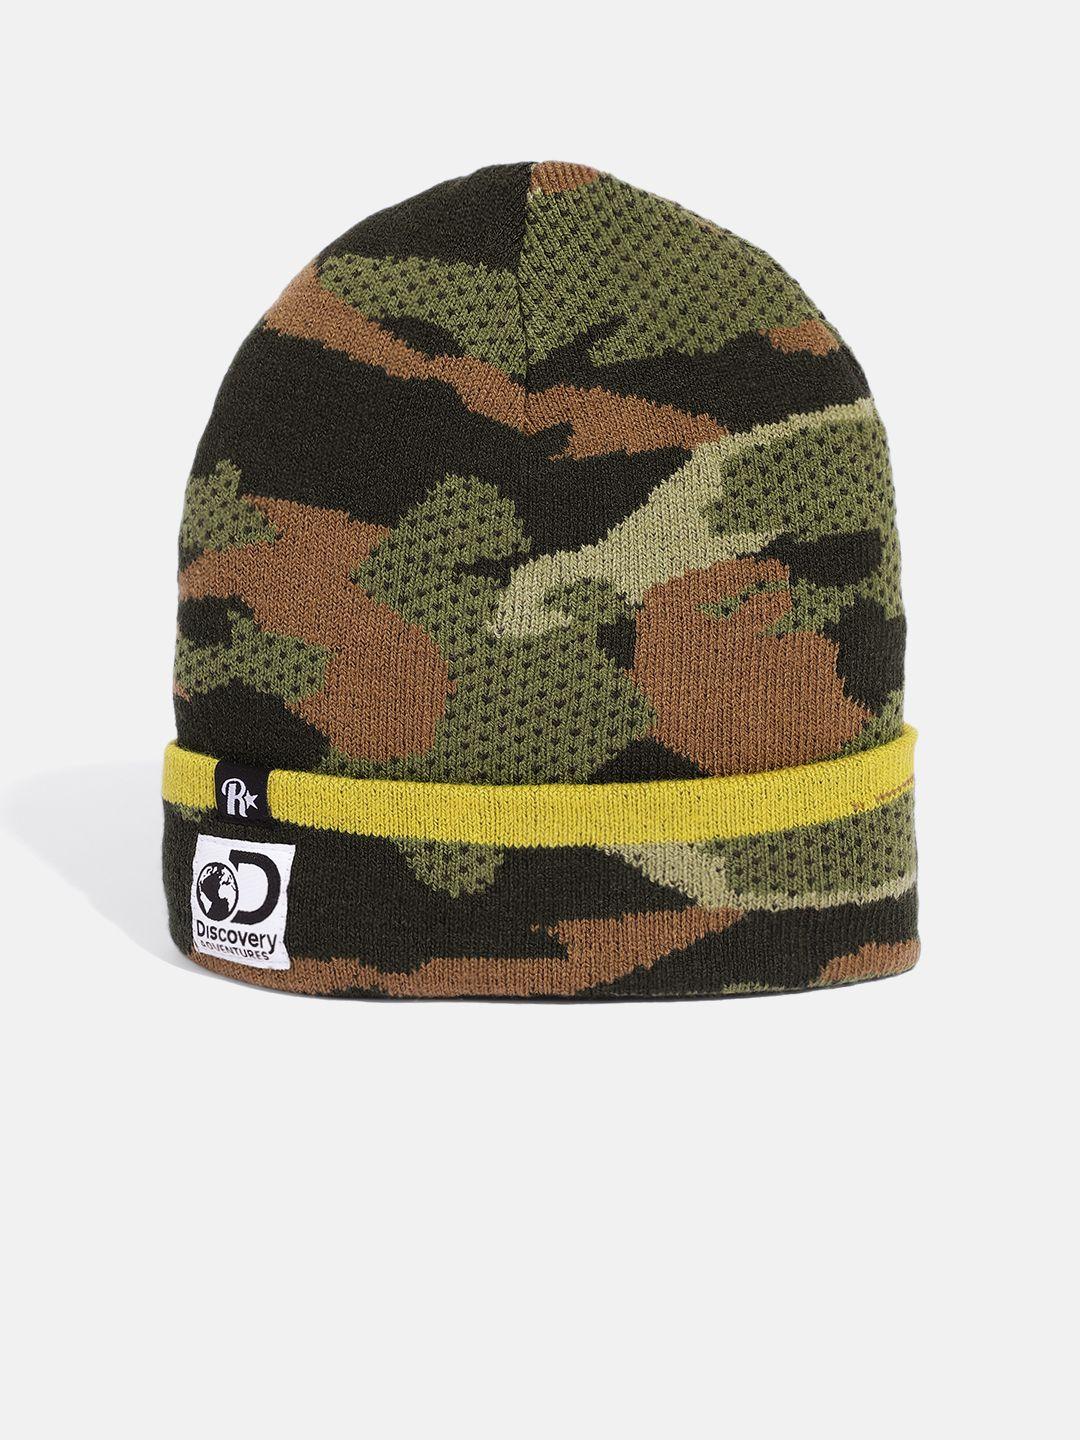 roadster x discovery adventures unisex olive green & black camouflage printed beanie